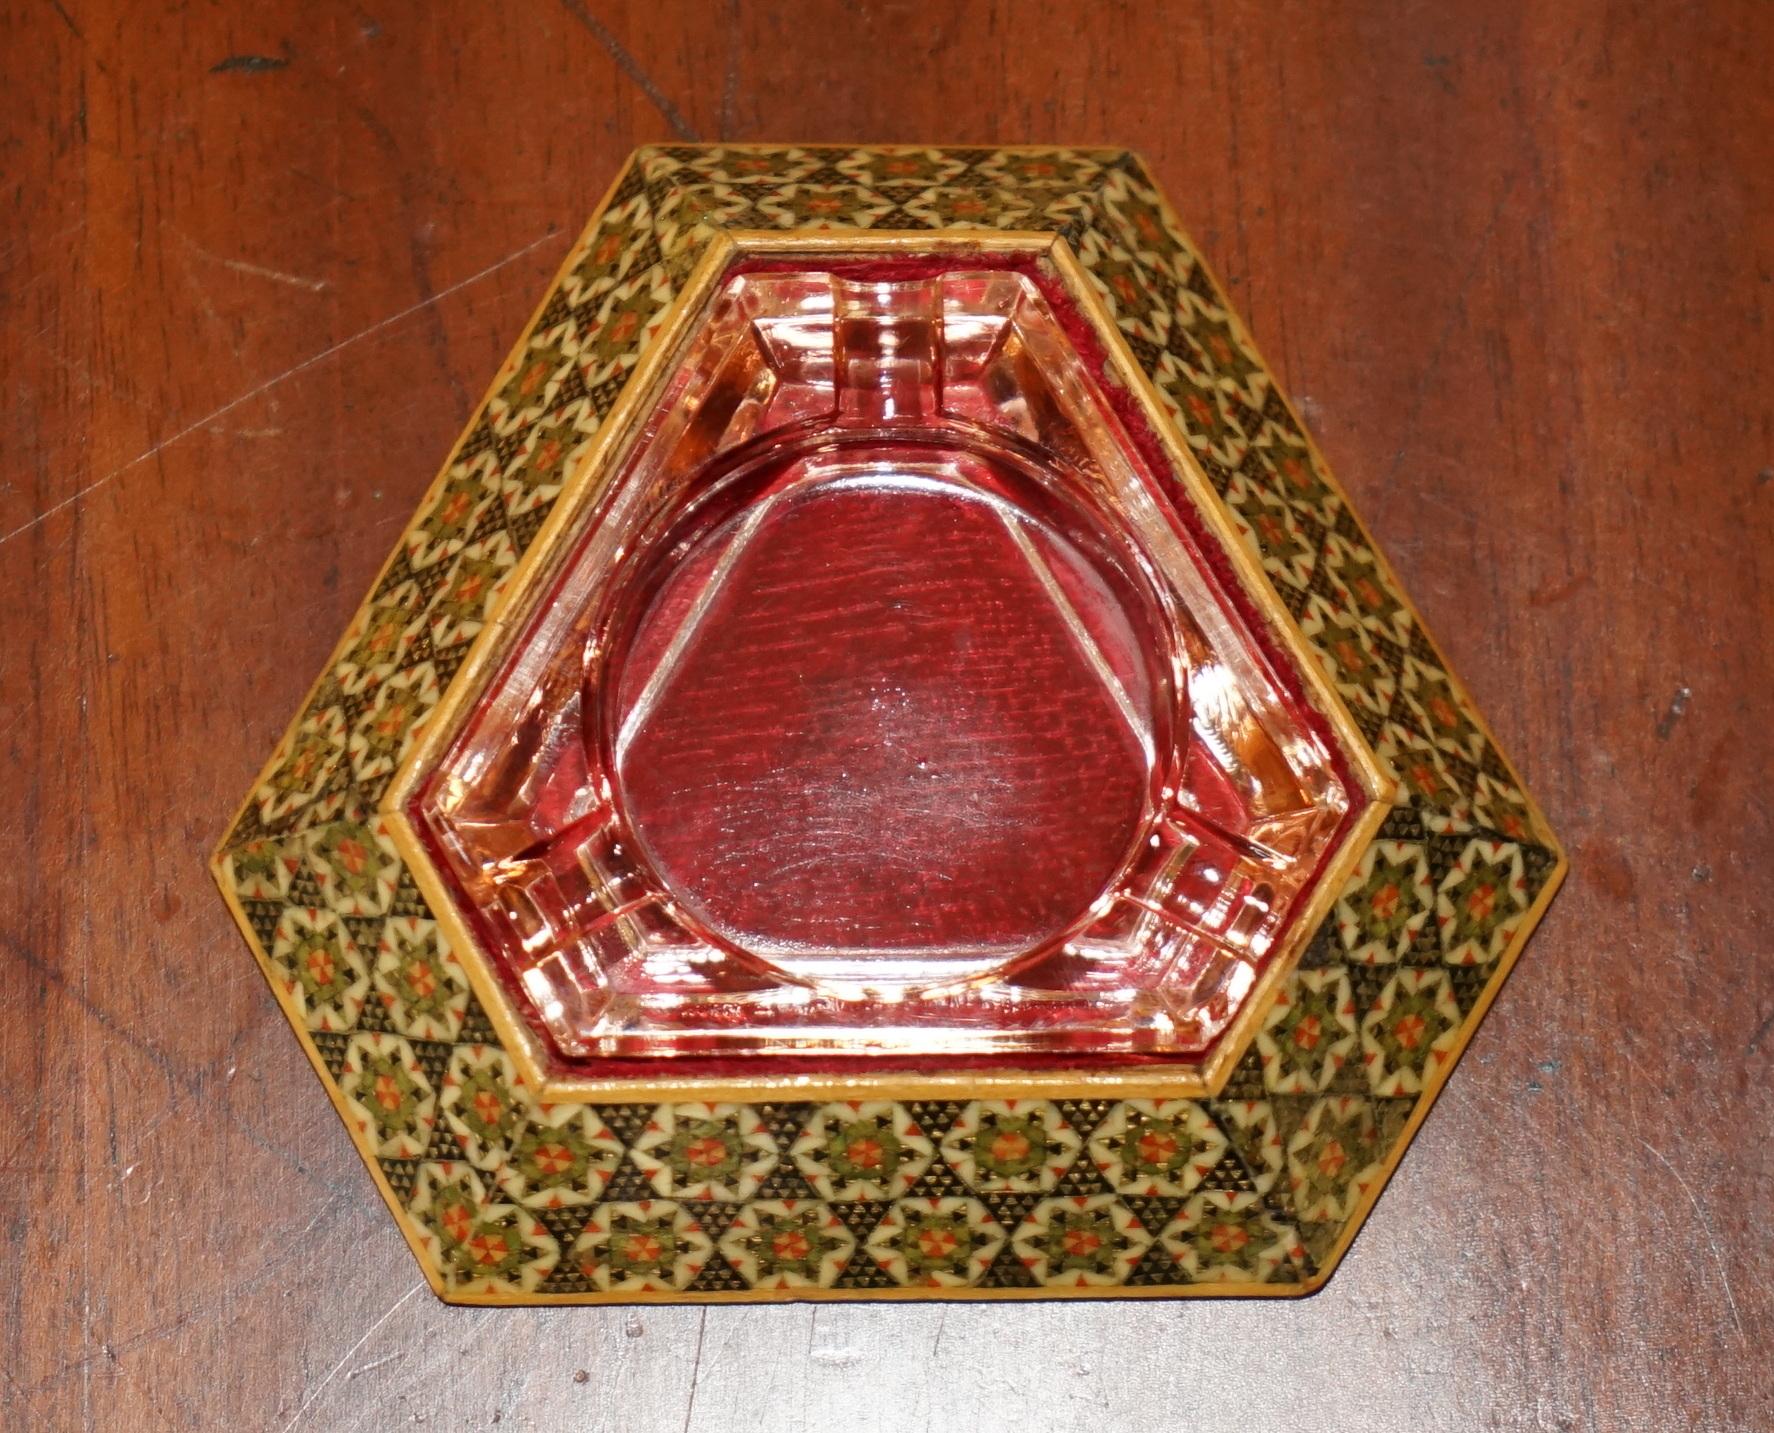 ANTIQUE PERSIAN ASHTRAY WiTH CRANBERRY GLASS TRIANGLE INTERNAL TRAY (Art déco) im Angebot